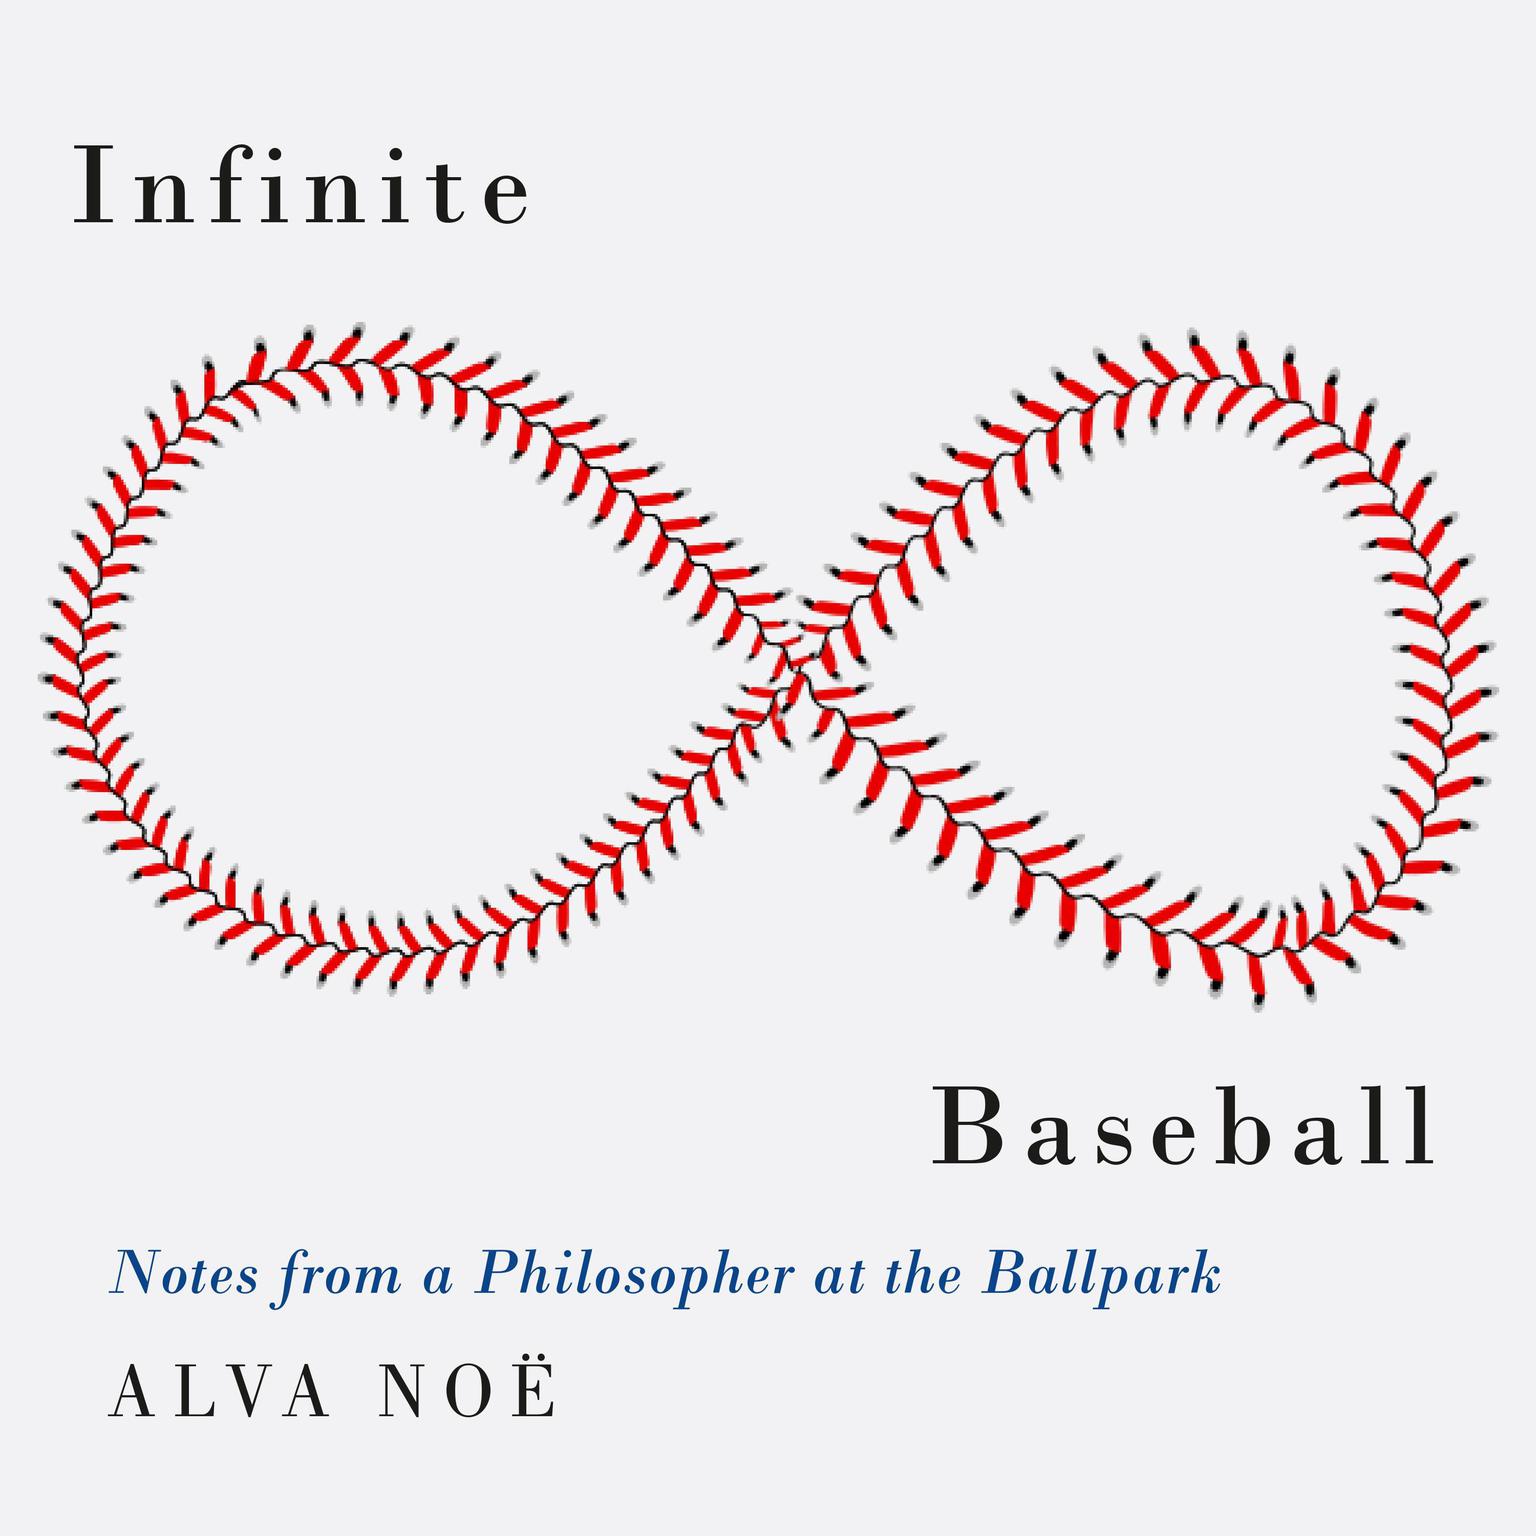 Infinite Baseball: Notes from a Philosopher at the Ballpark Audiobook, by Alva Noë